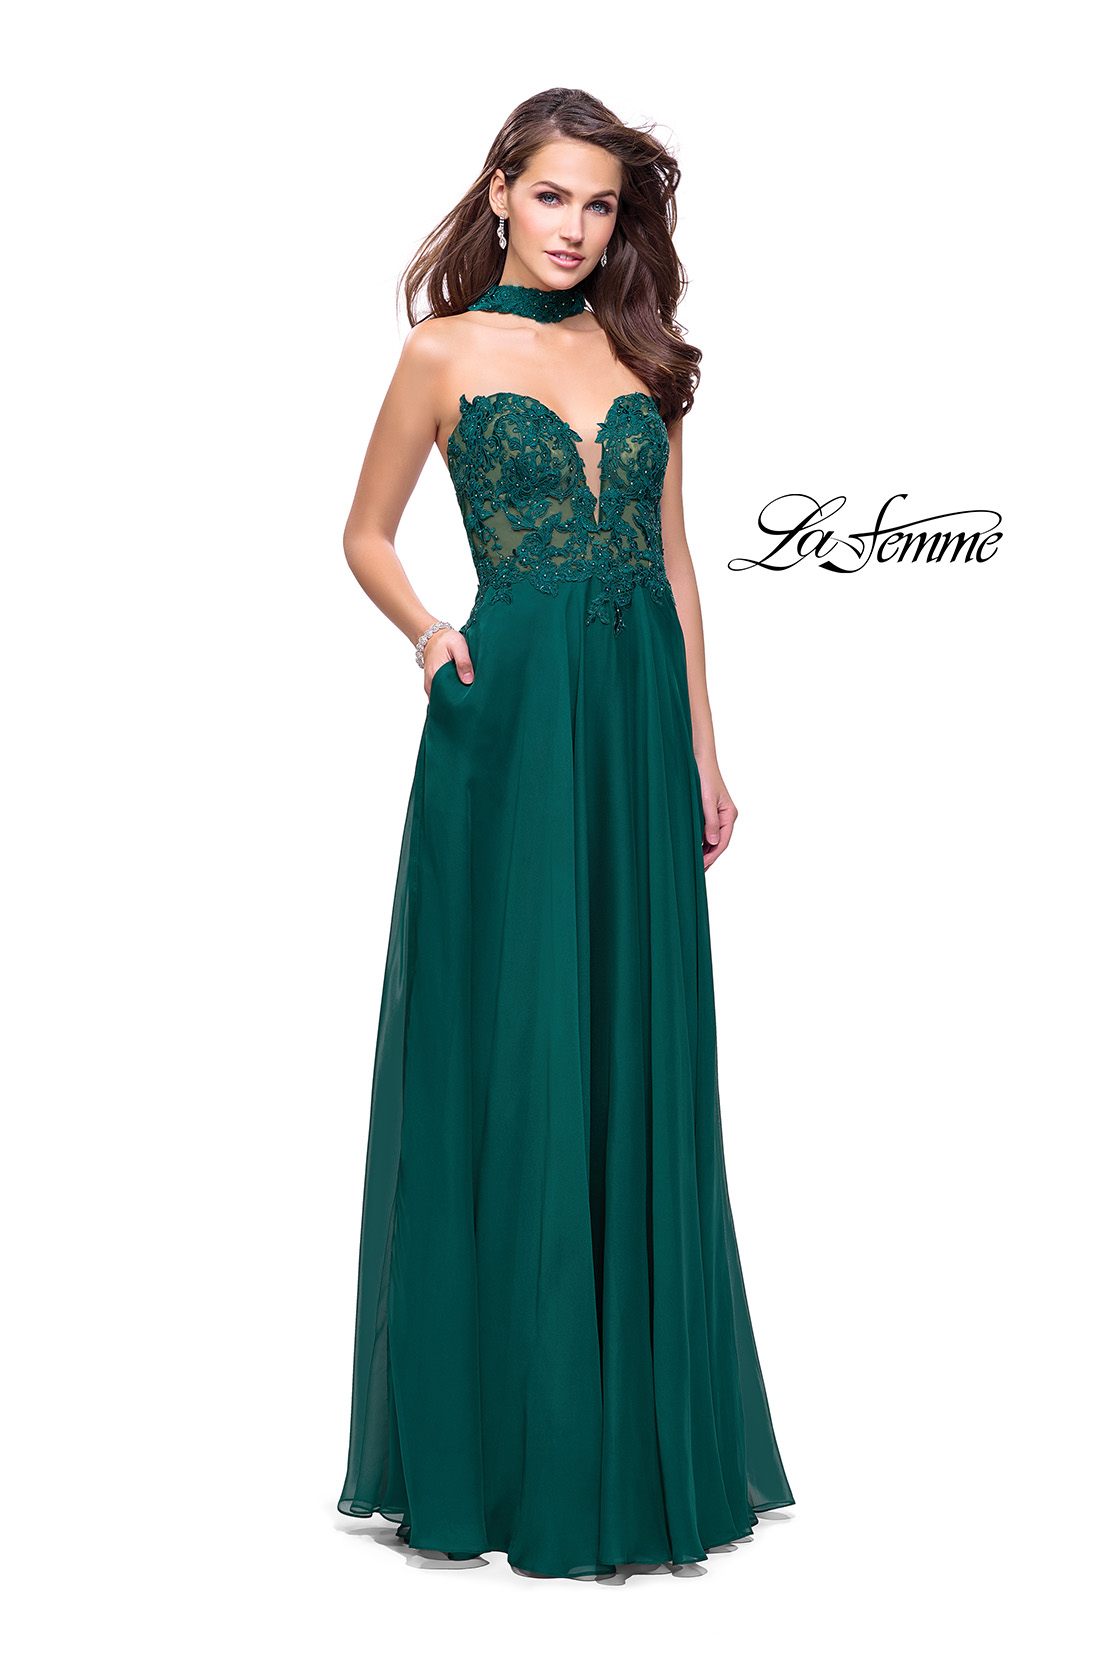 Hunter Green La Femme Prom Dress with Lace Top and Pockets 